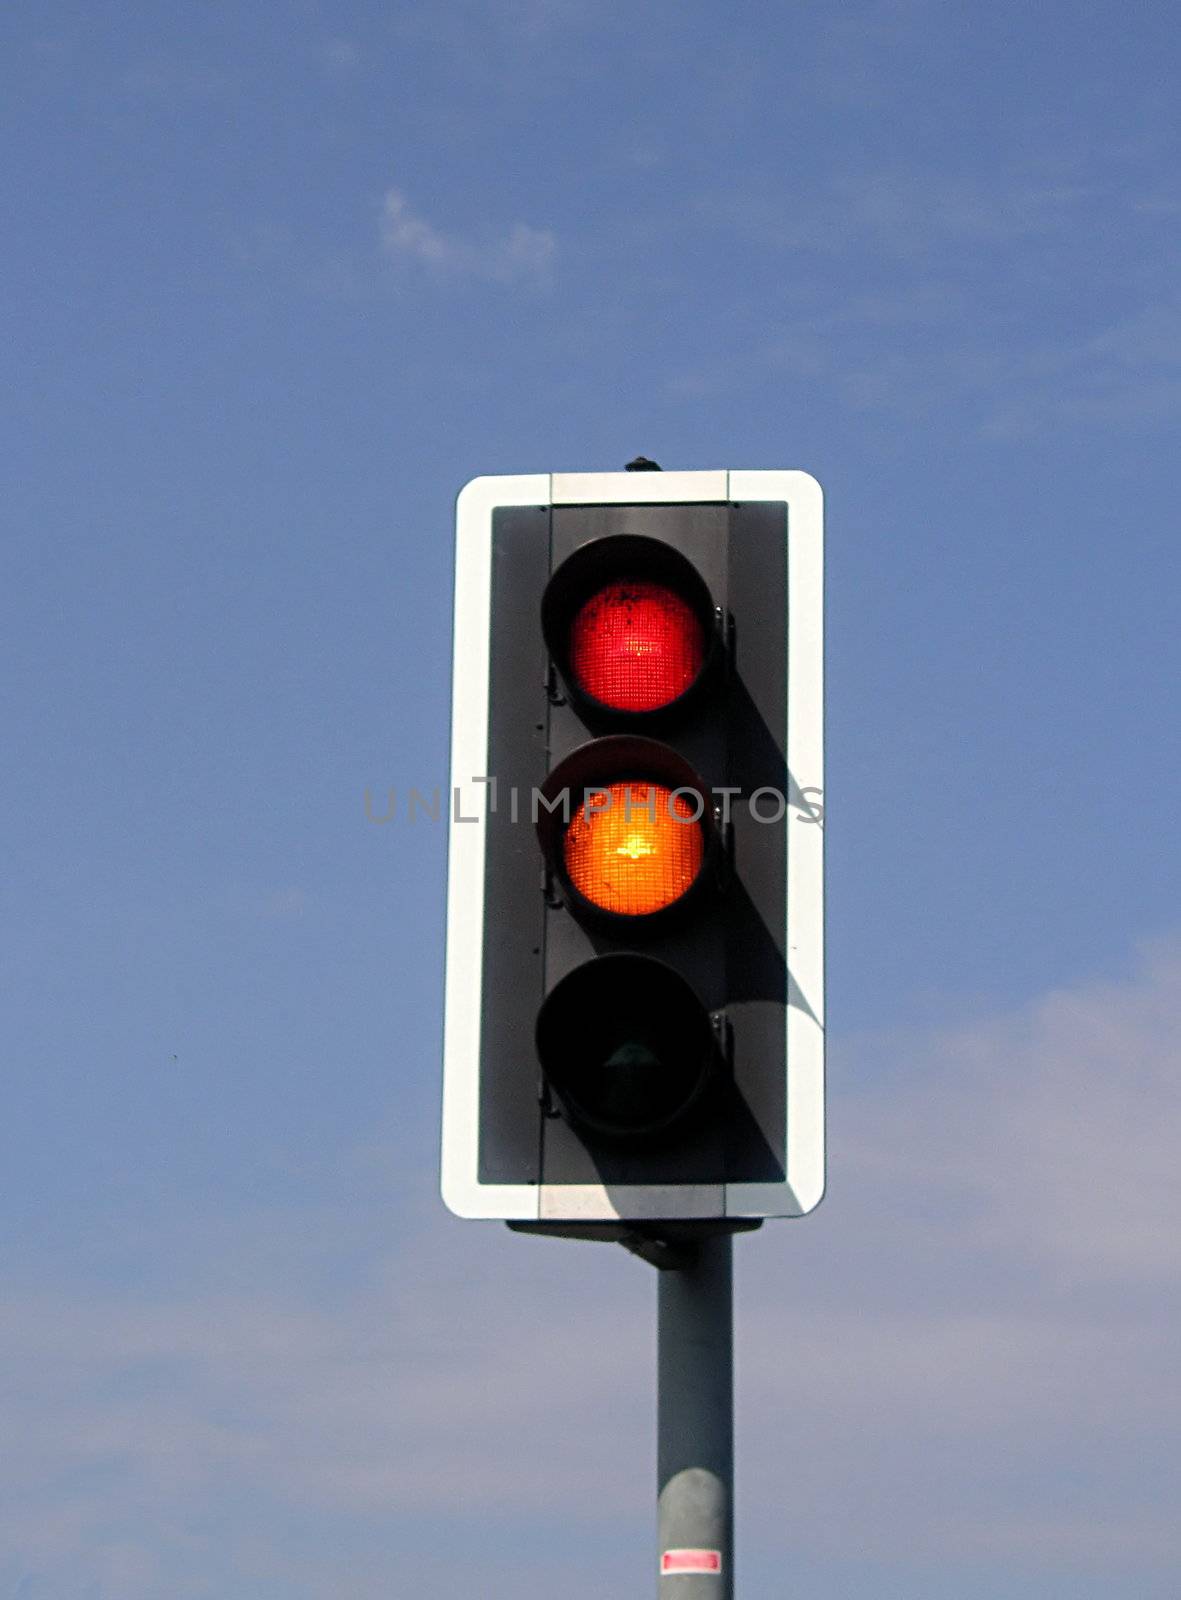 traffic lights as they change from red to amber both lights still on